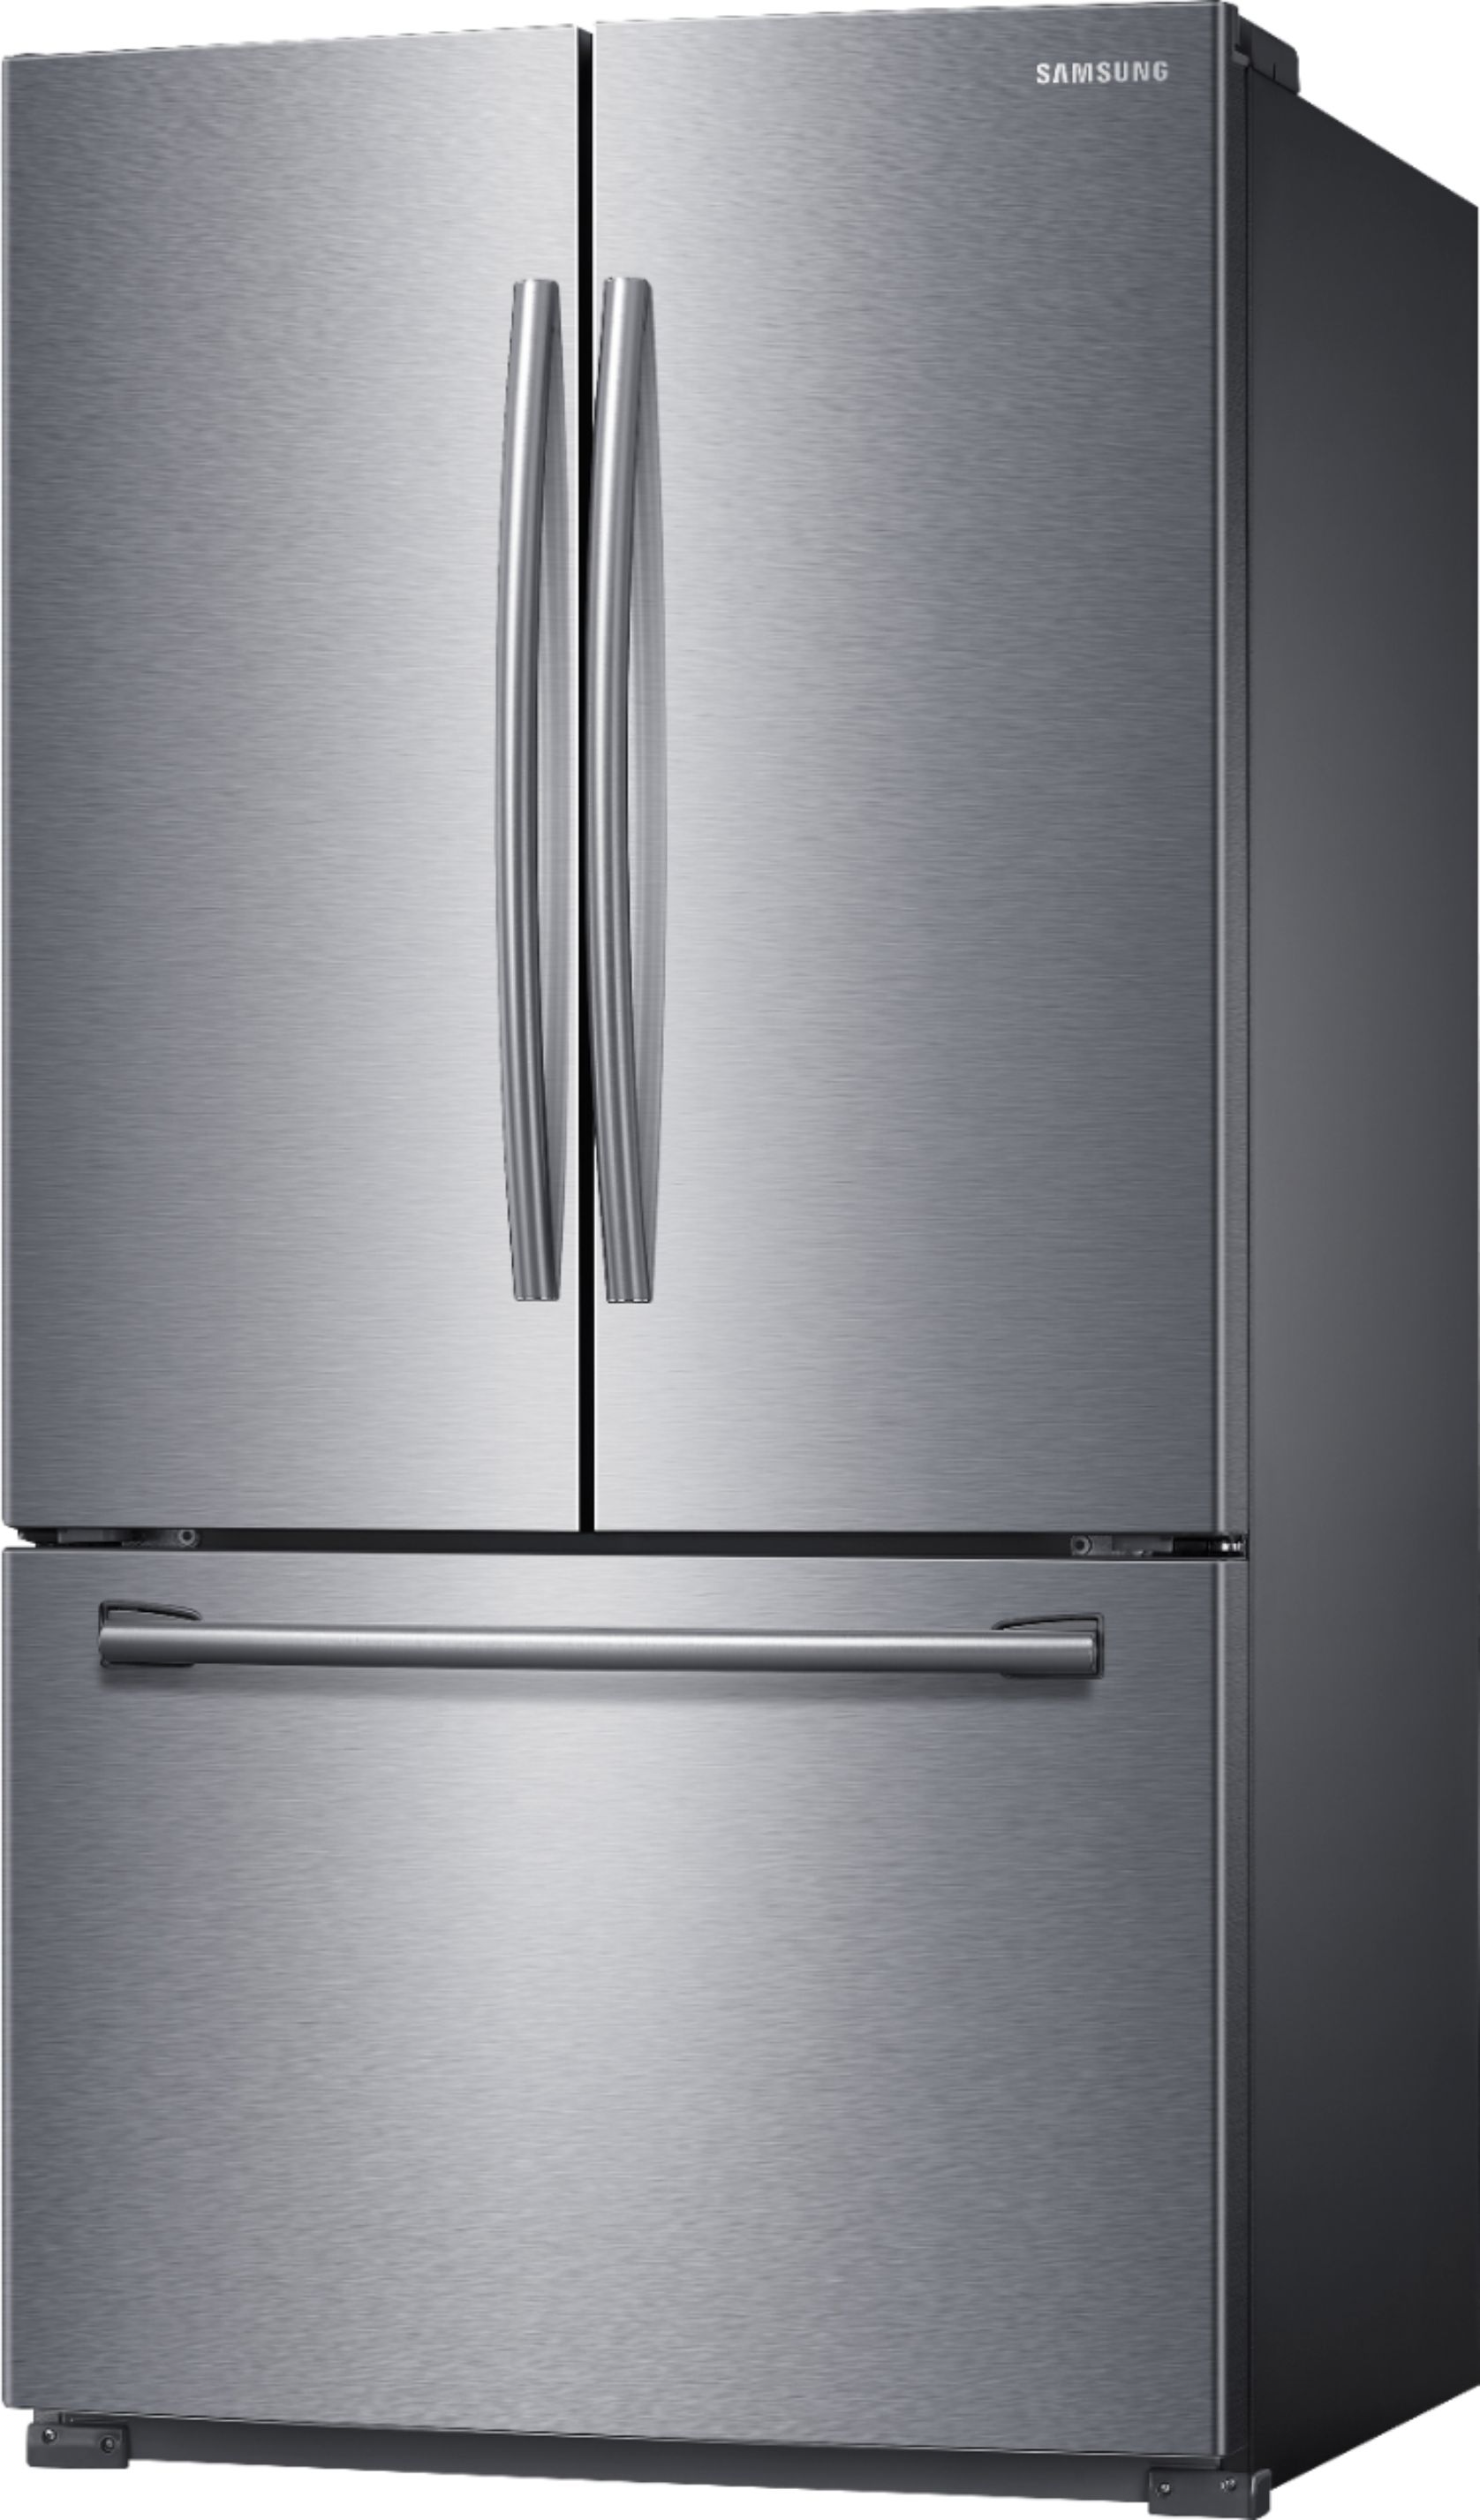 Left View: Samsung - 25.5 Cu. Ft. French Door Refrigerator with Filtered Ice Maker - Stainless steel